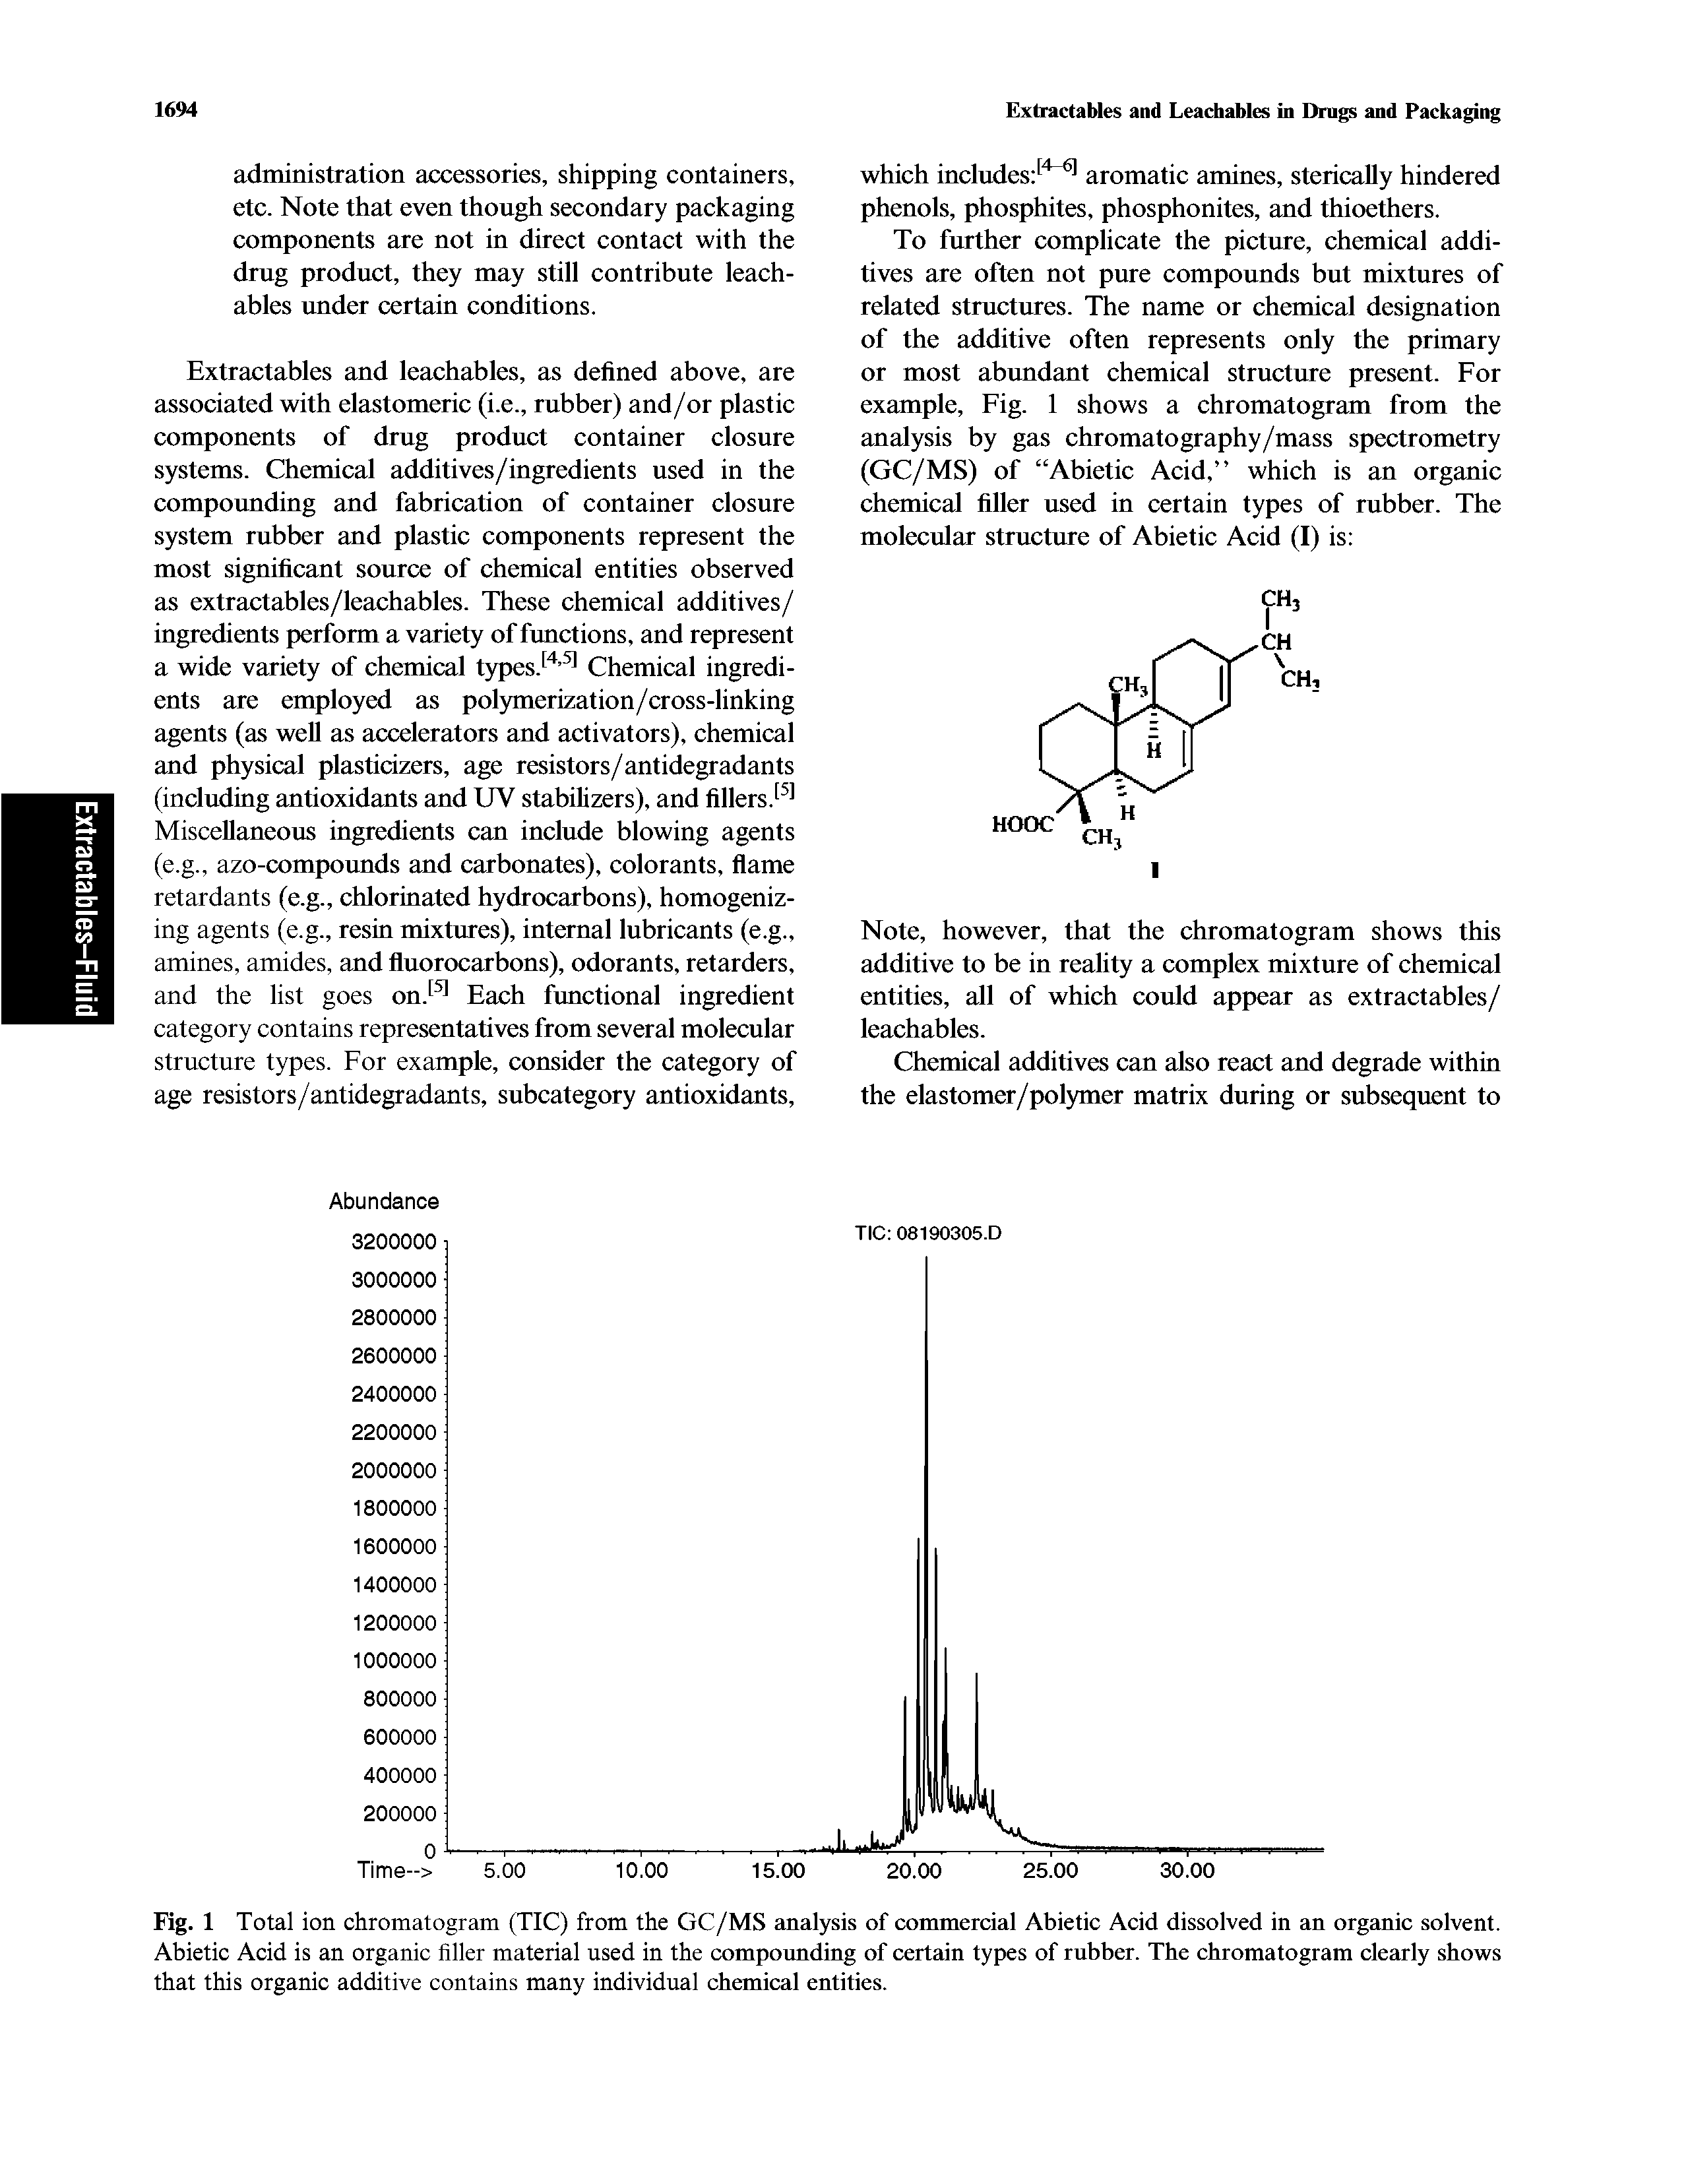 Fig. 1 Total ion chromatogram (TIC) from the GC/MS analysis of commercial Abietic Acid dissolved in an organic solvent. Abietic Acid is an organic filler material used in the compounding of certain types of rubber. The chromatogram clearly shows that this organic additive contains many individual chemical entities.